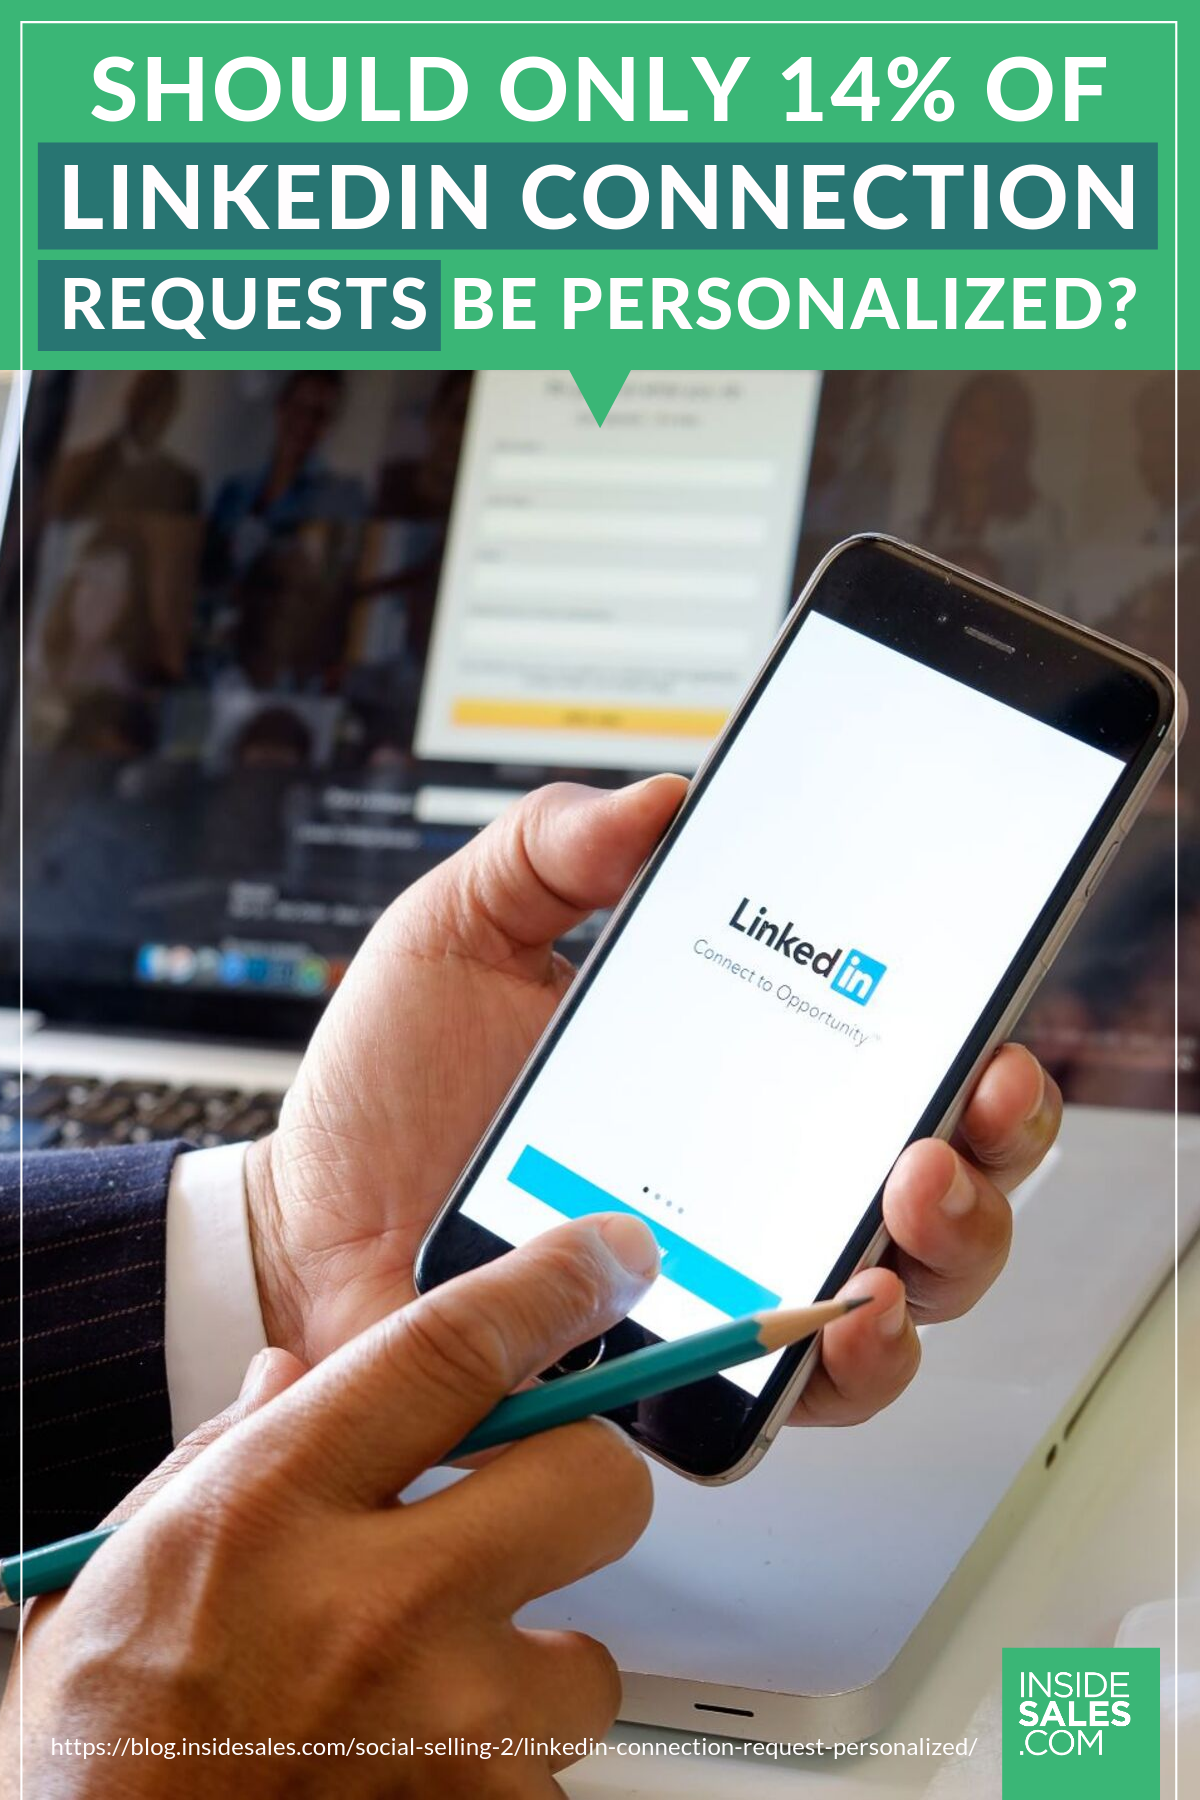 Should Only 14% Of LinkedIn Connection Requests Be Personalized? https://www.insidesales.com/blog/social-selling-2/linkedin-connection-request-personalized/